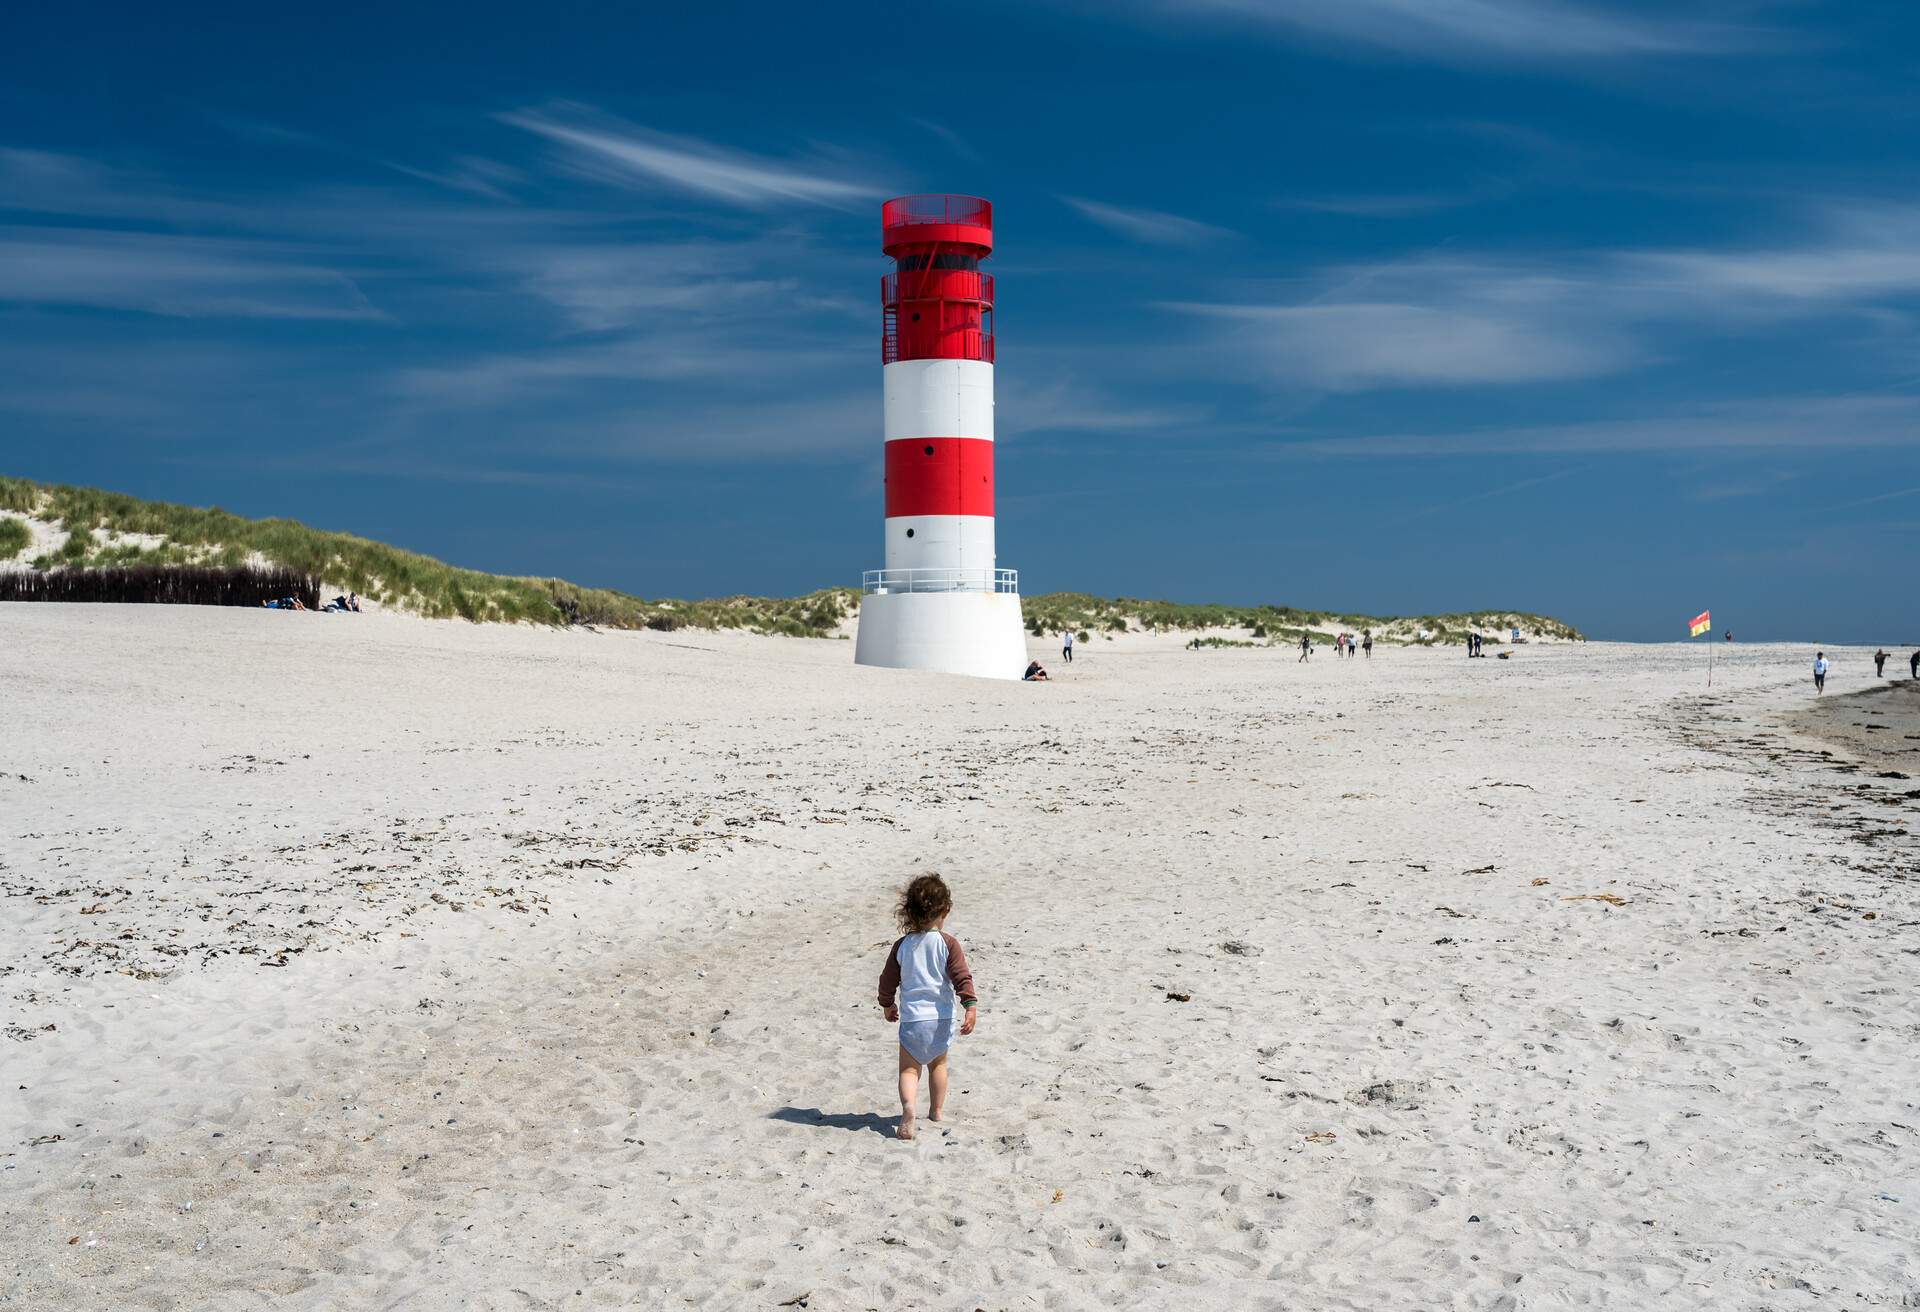 DEST_GERMANY_HELGOLAND_ISLAND_GettyImages-1172779015